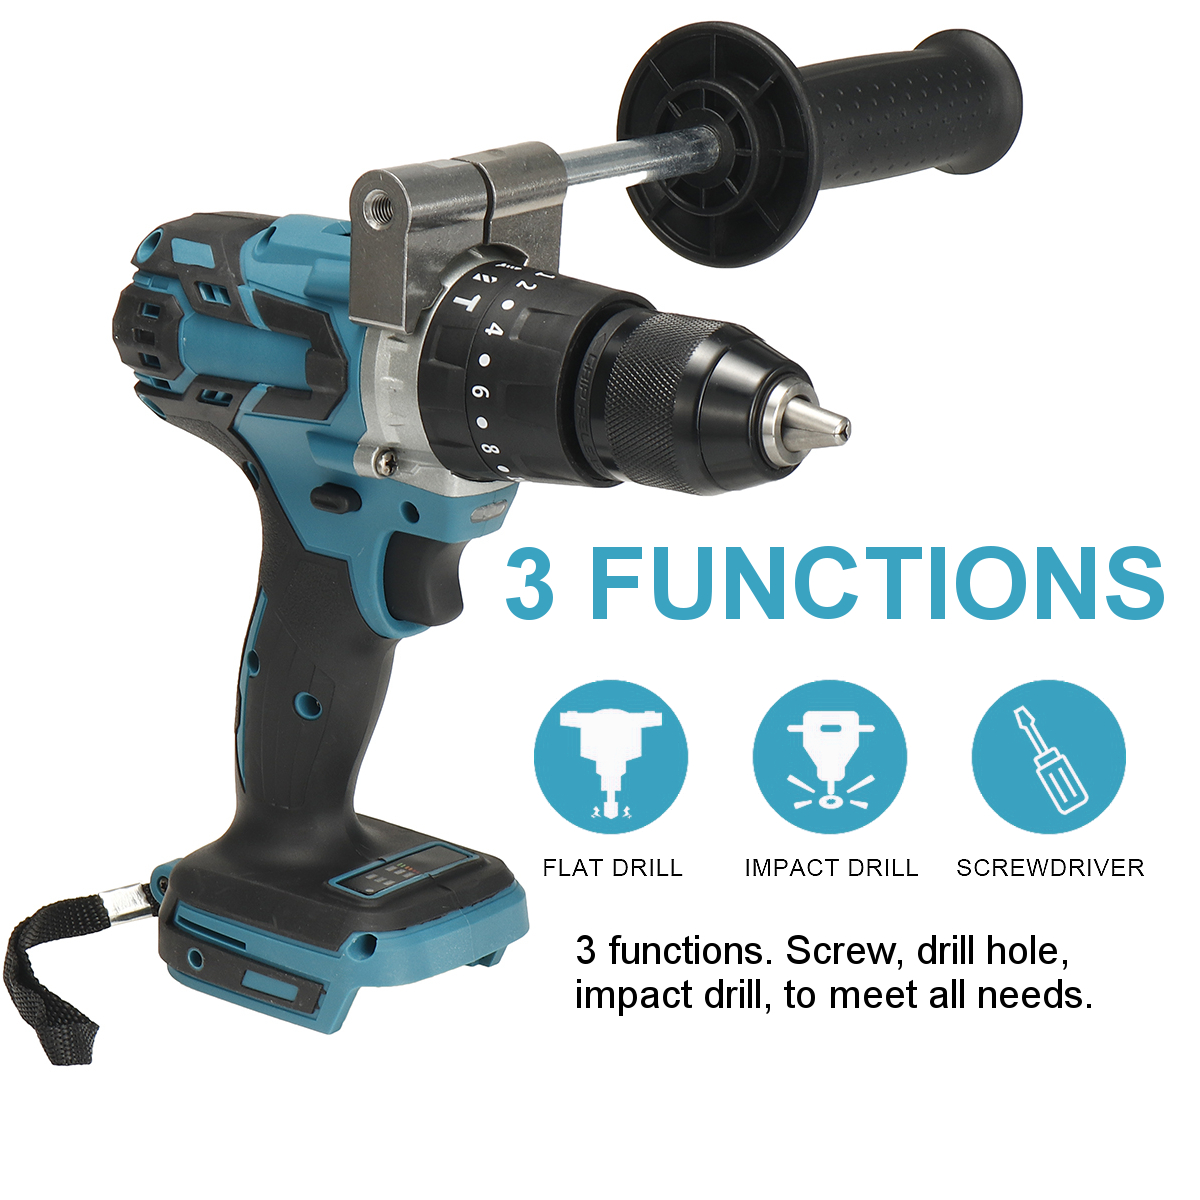 Brushless-Electric-Drill-20-Torque-520NM-Cordless-Screwdriver-13mm-Chuck-Power-Drill-for-Makita-18V--1801609-5